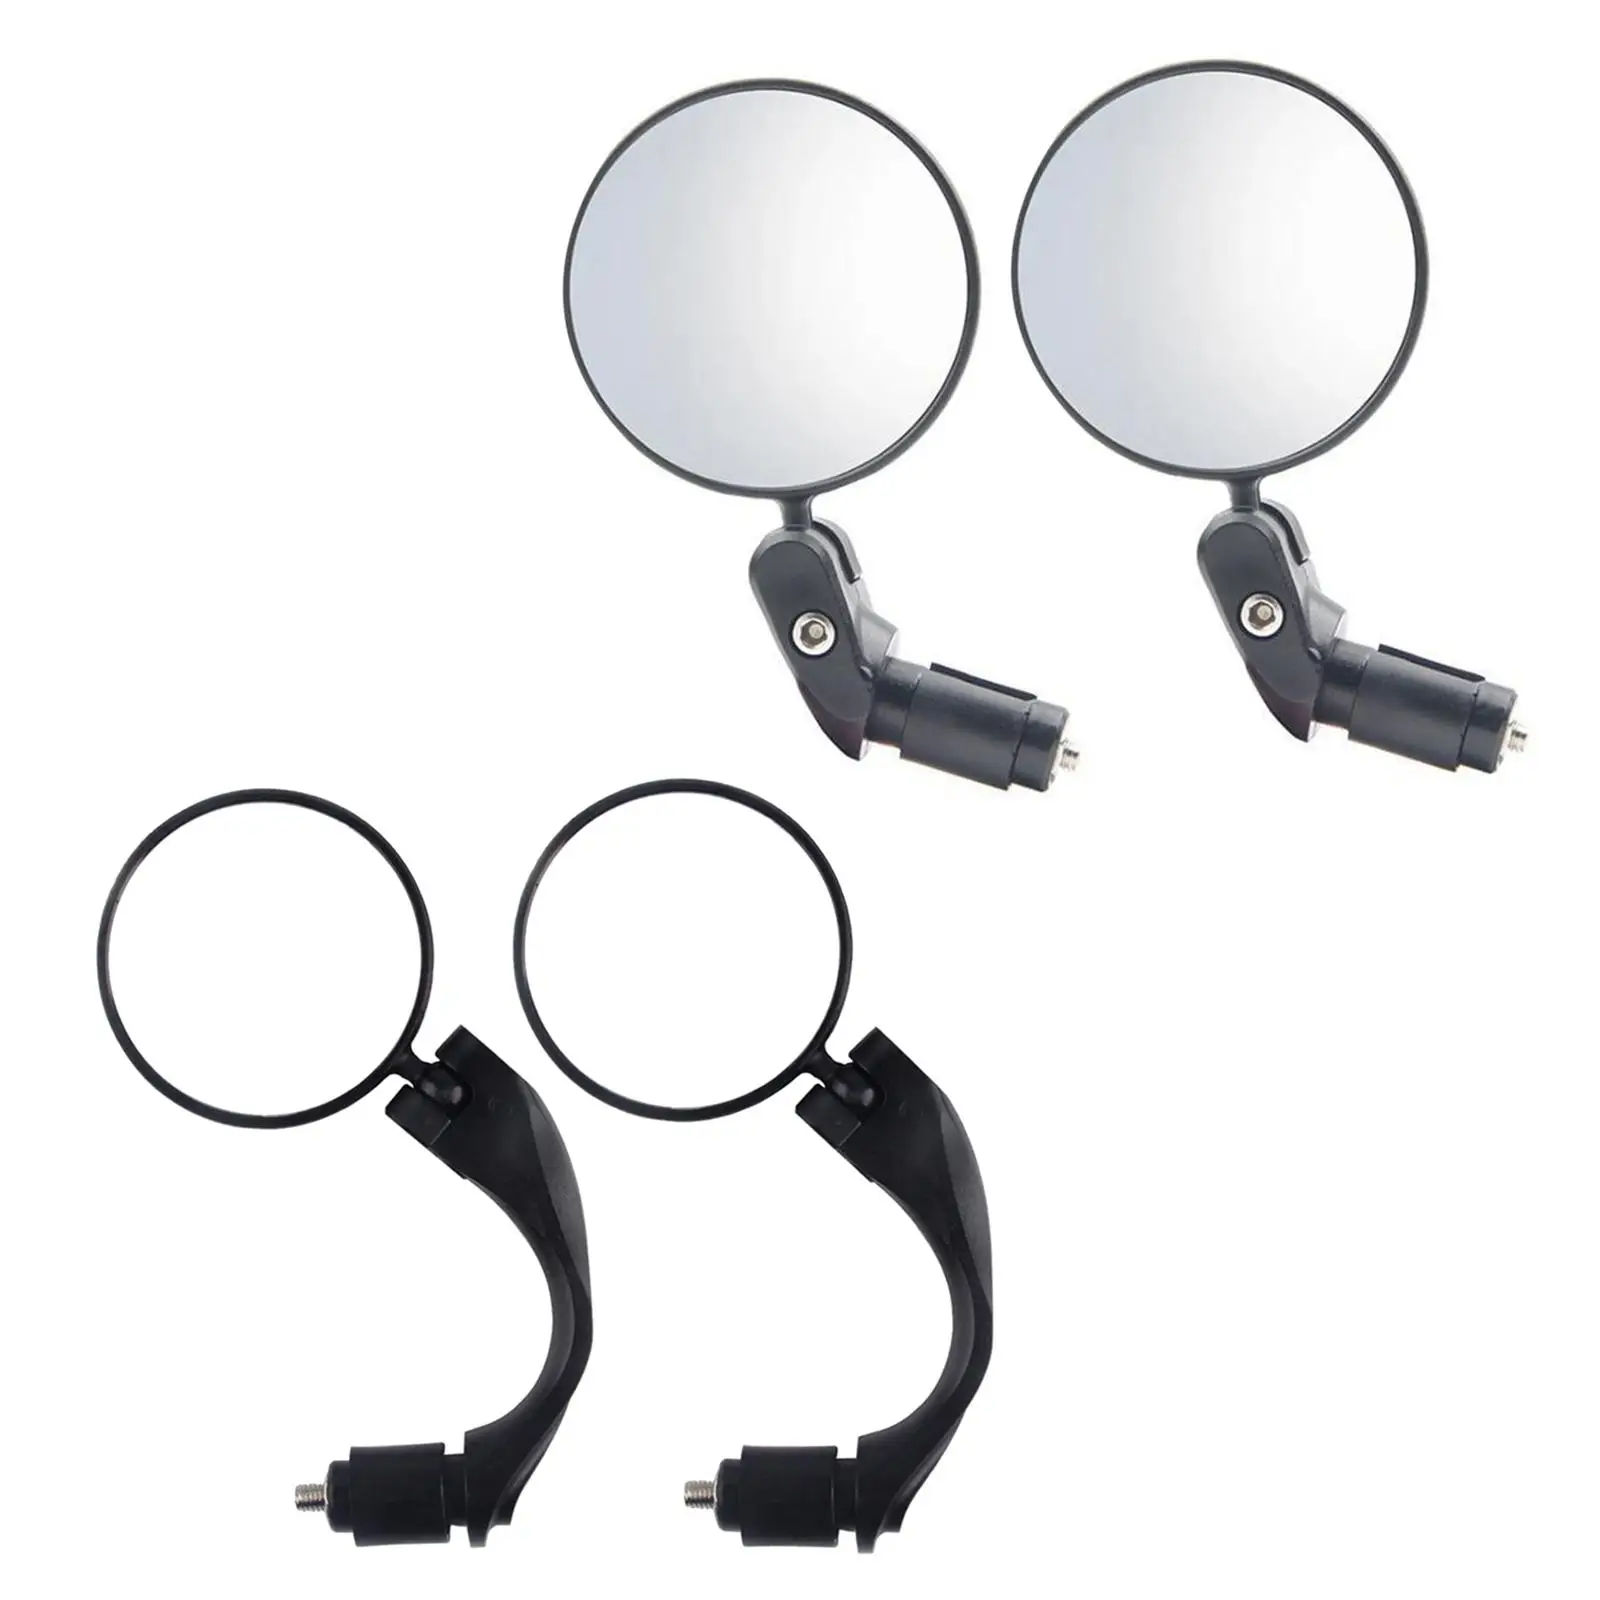 2x Bike   Convex Mirrors MTB Mountain Reflector Bicycle  Scratch Resistant